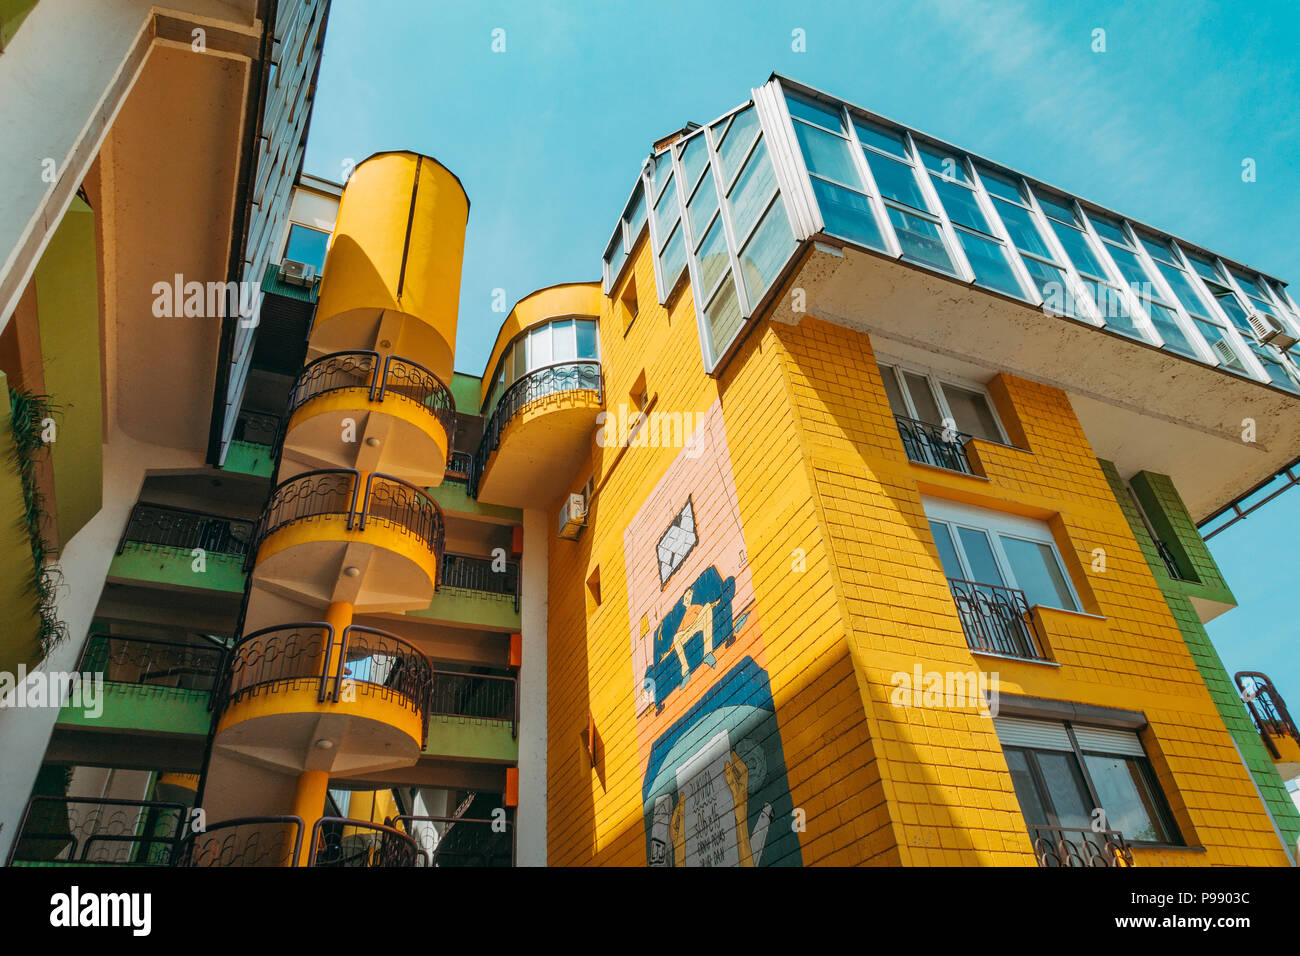 The Papagajka (Parrot) building in Sarajevo, with shades of the brutalist architecture of socialist Yugoslavia, now painted bright yellow and green. Stock Photo